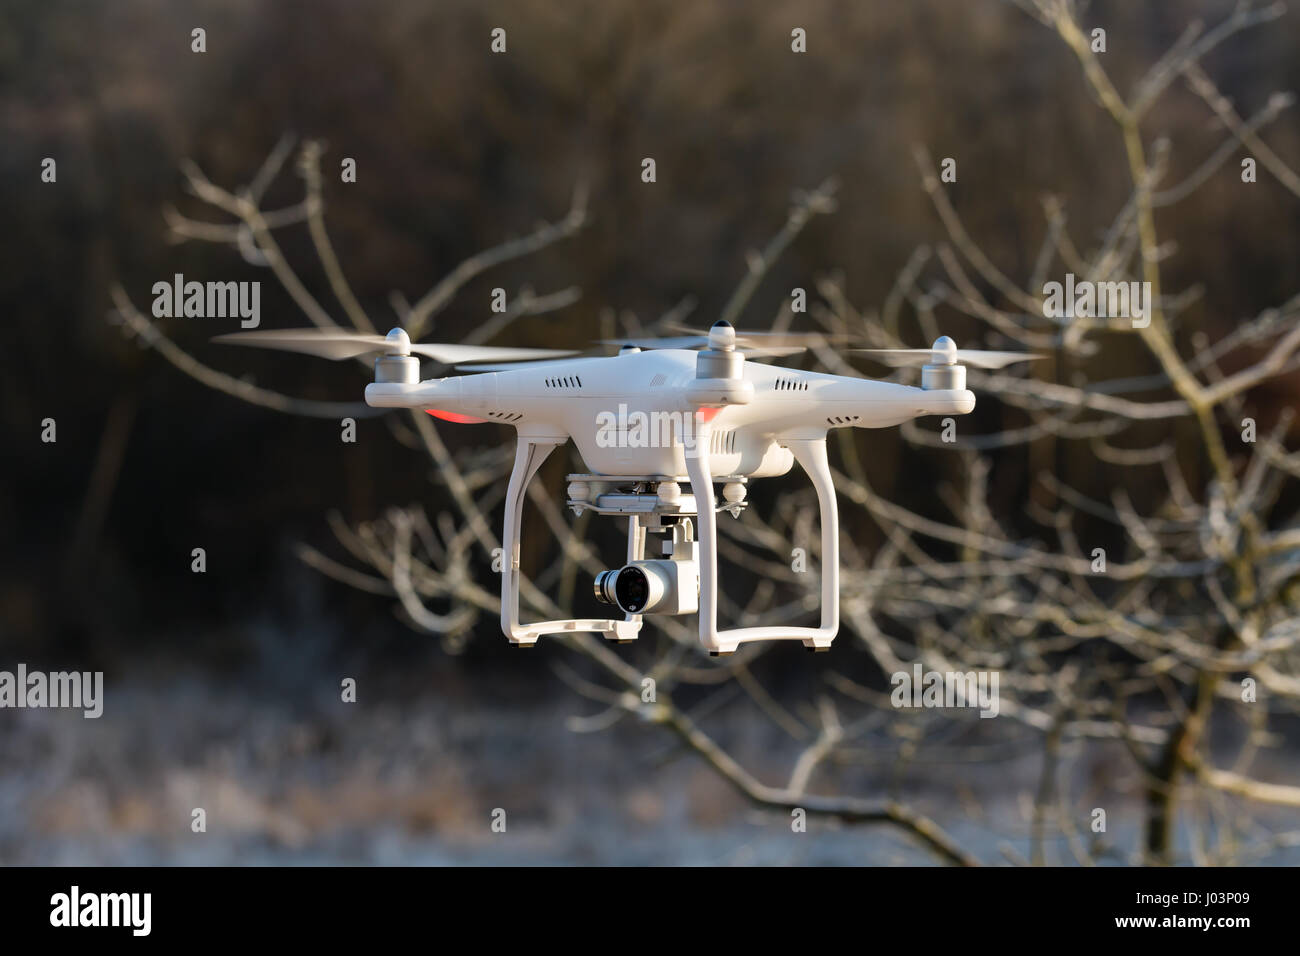 Niedernhausen, Germany - February 25, 2017: DJI Phantom 3 Standard Quadcopter flying in front of wintry vegetation, front view, closeup Stock Photo